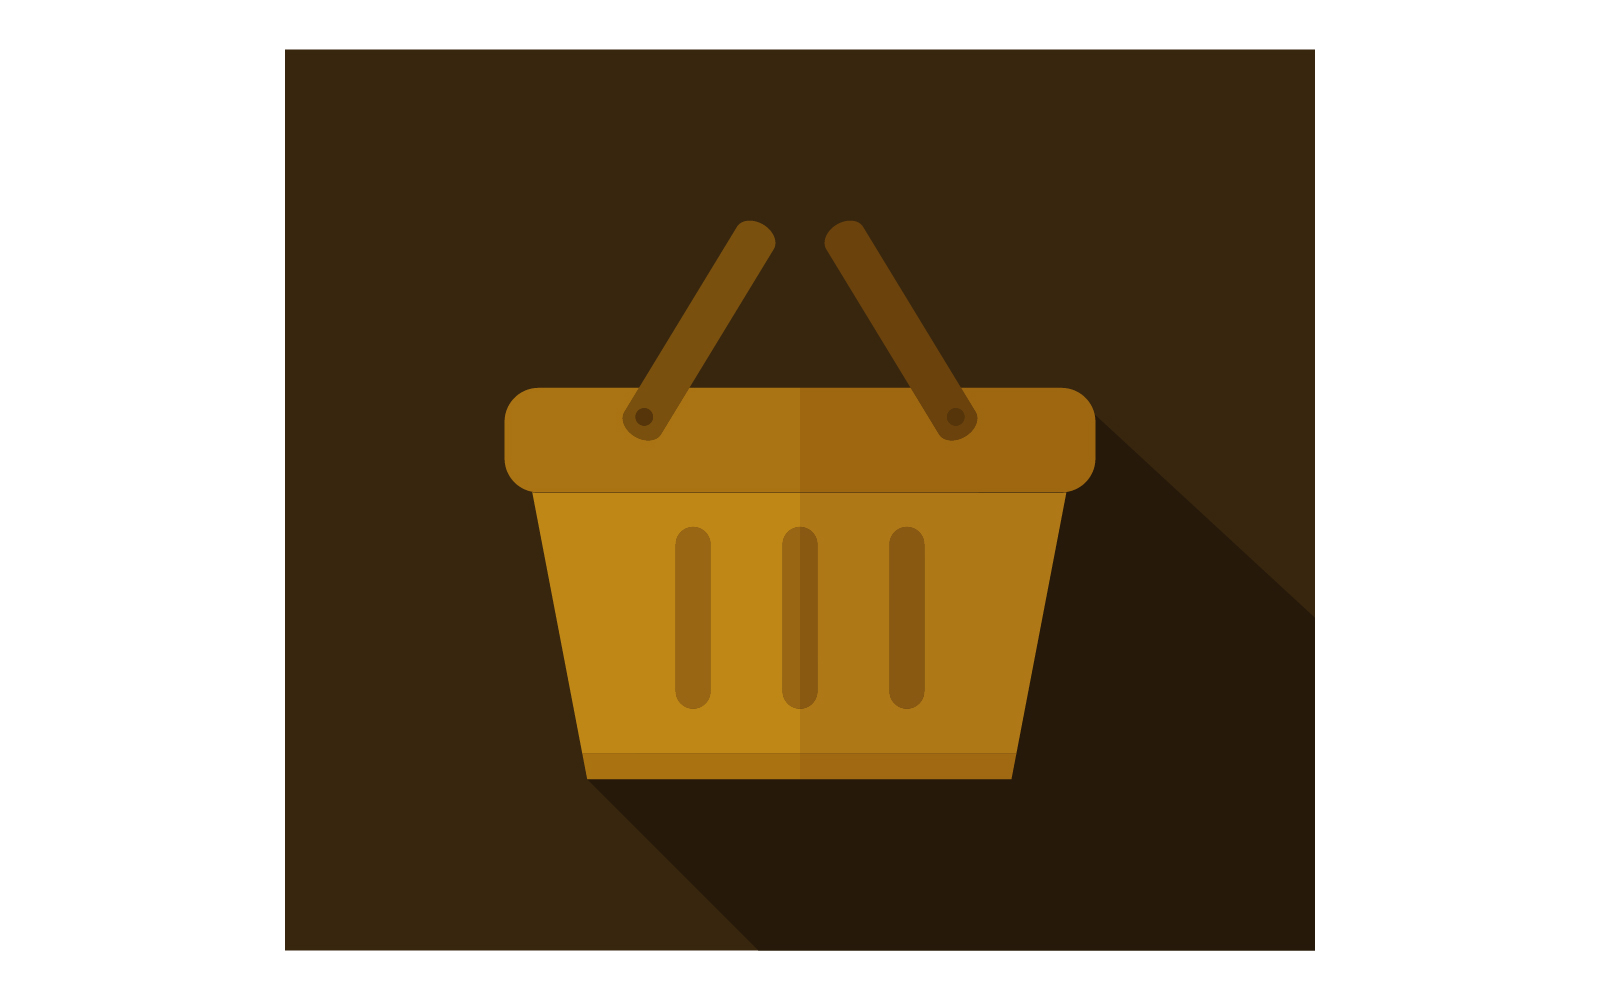 Shopping basket illustrated in vector and colored on background